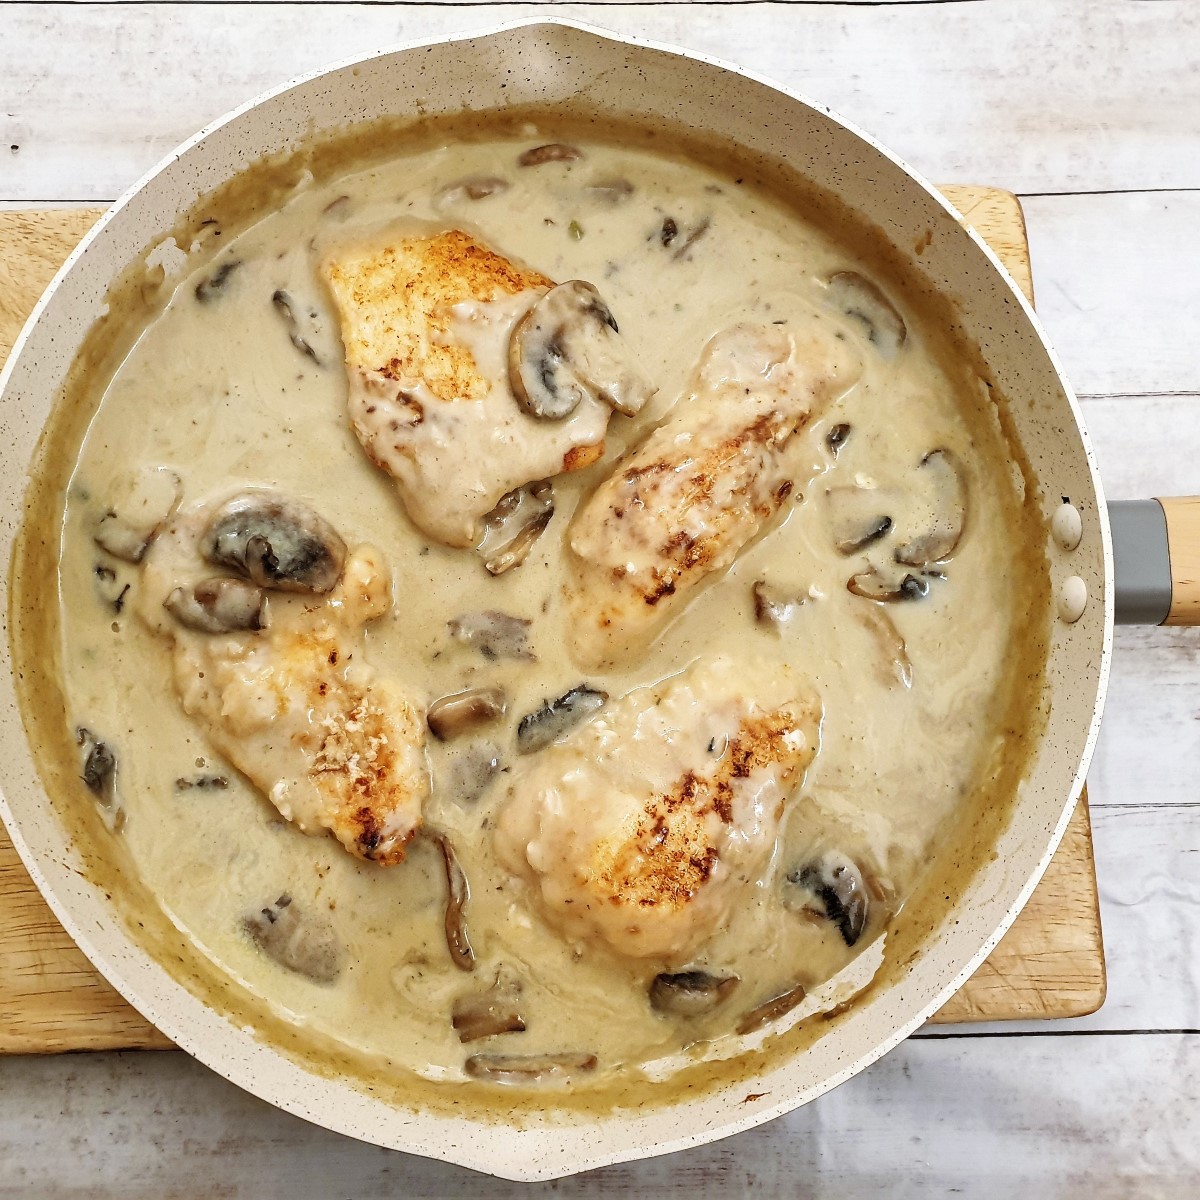 Chicken fillets cooking in marsala sauce in a frying pan.